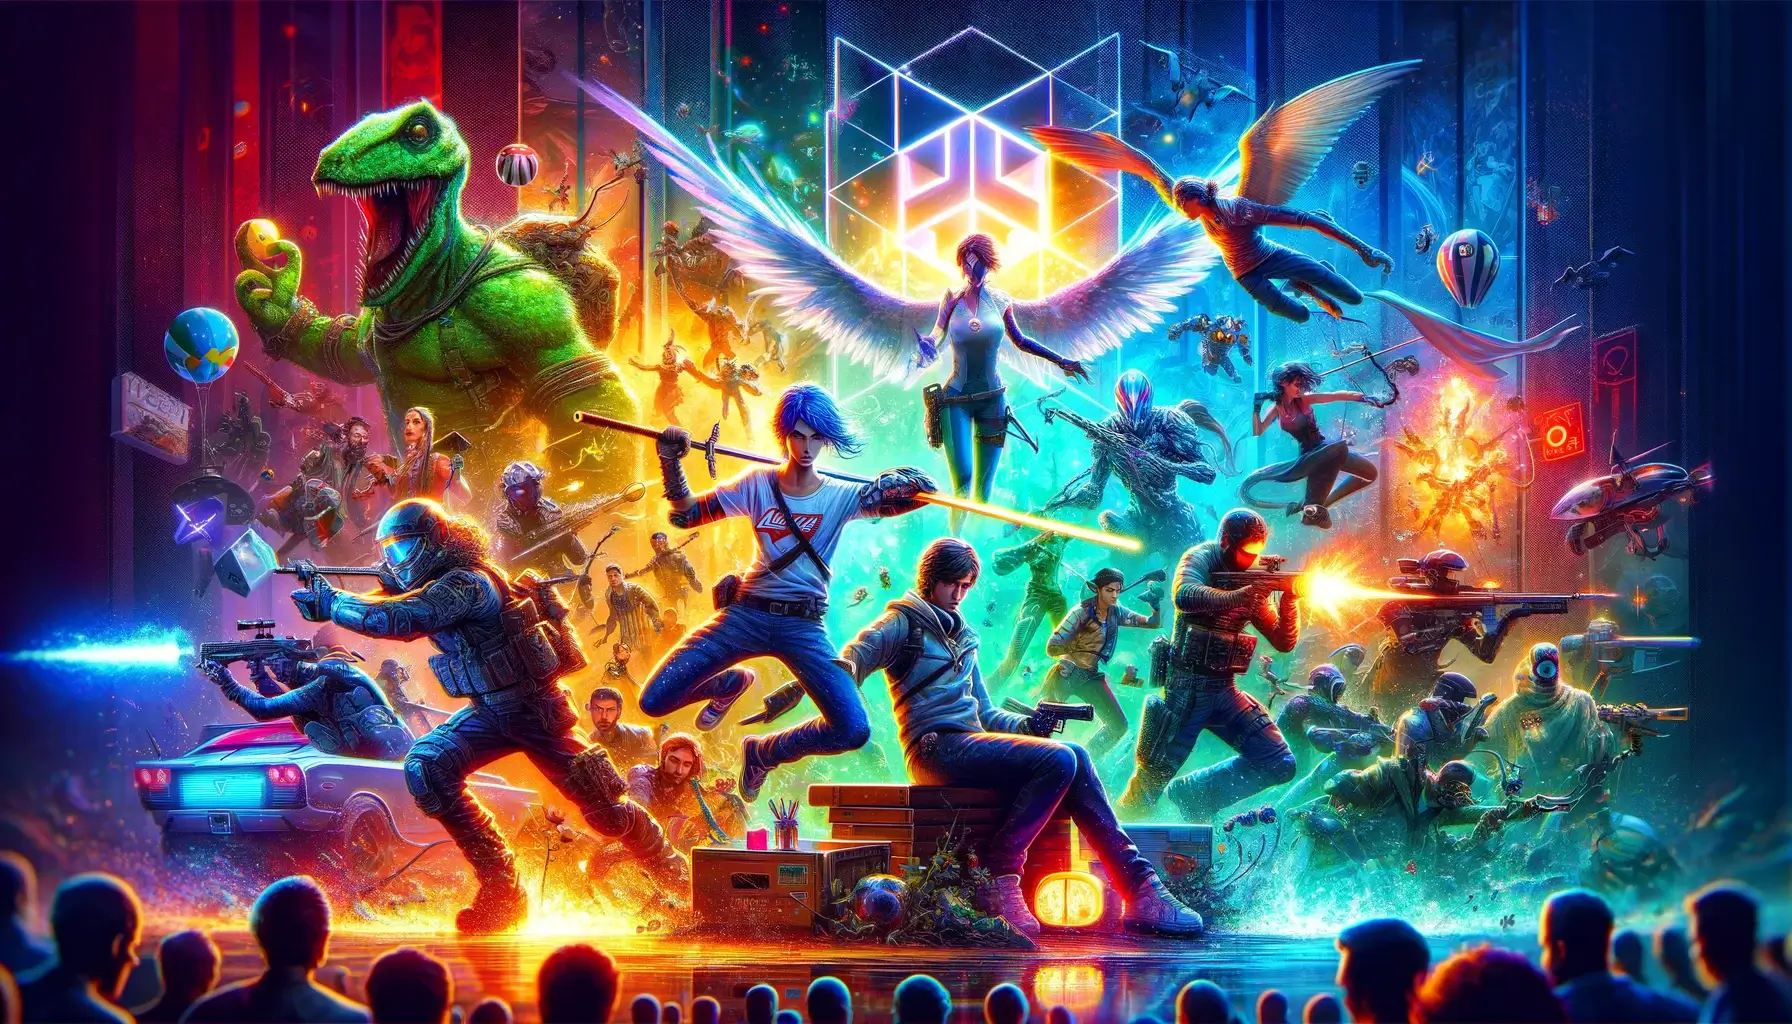 An electrifying scene filled with characters and elements from the top video game releases of 2024, displaying a vibrant array of action, from fantastical creatures to futuristic battles, in front of an enthralled audience.